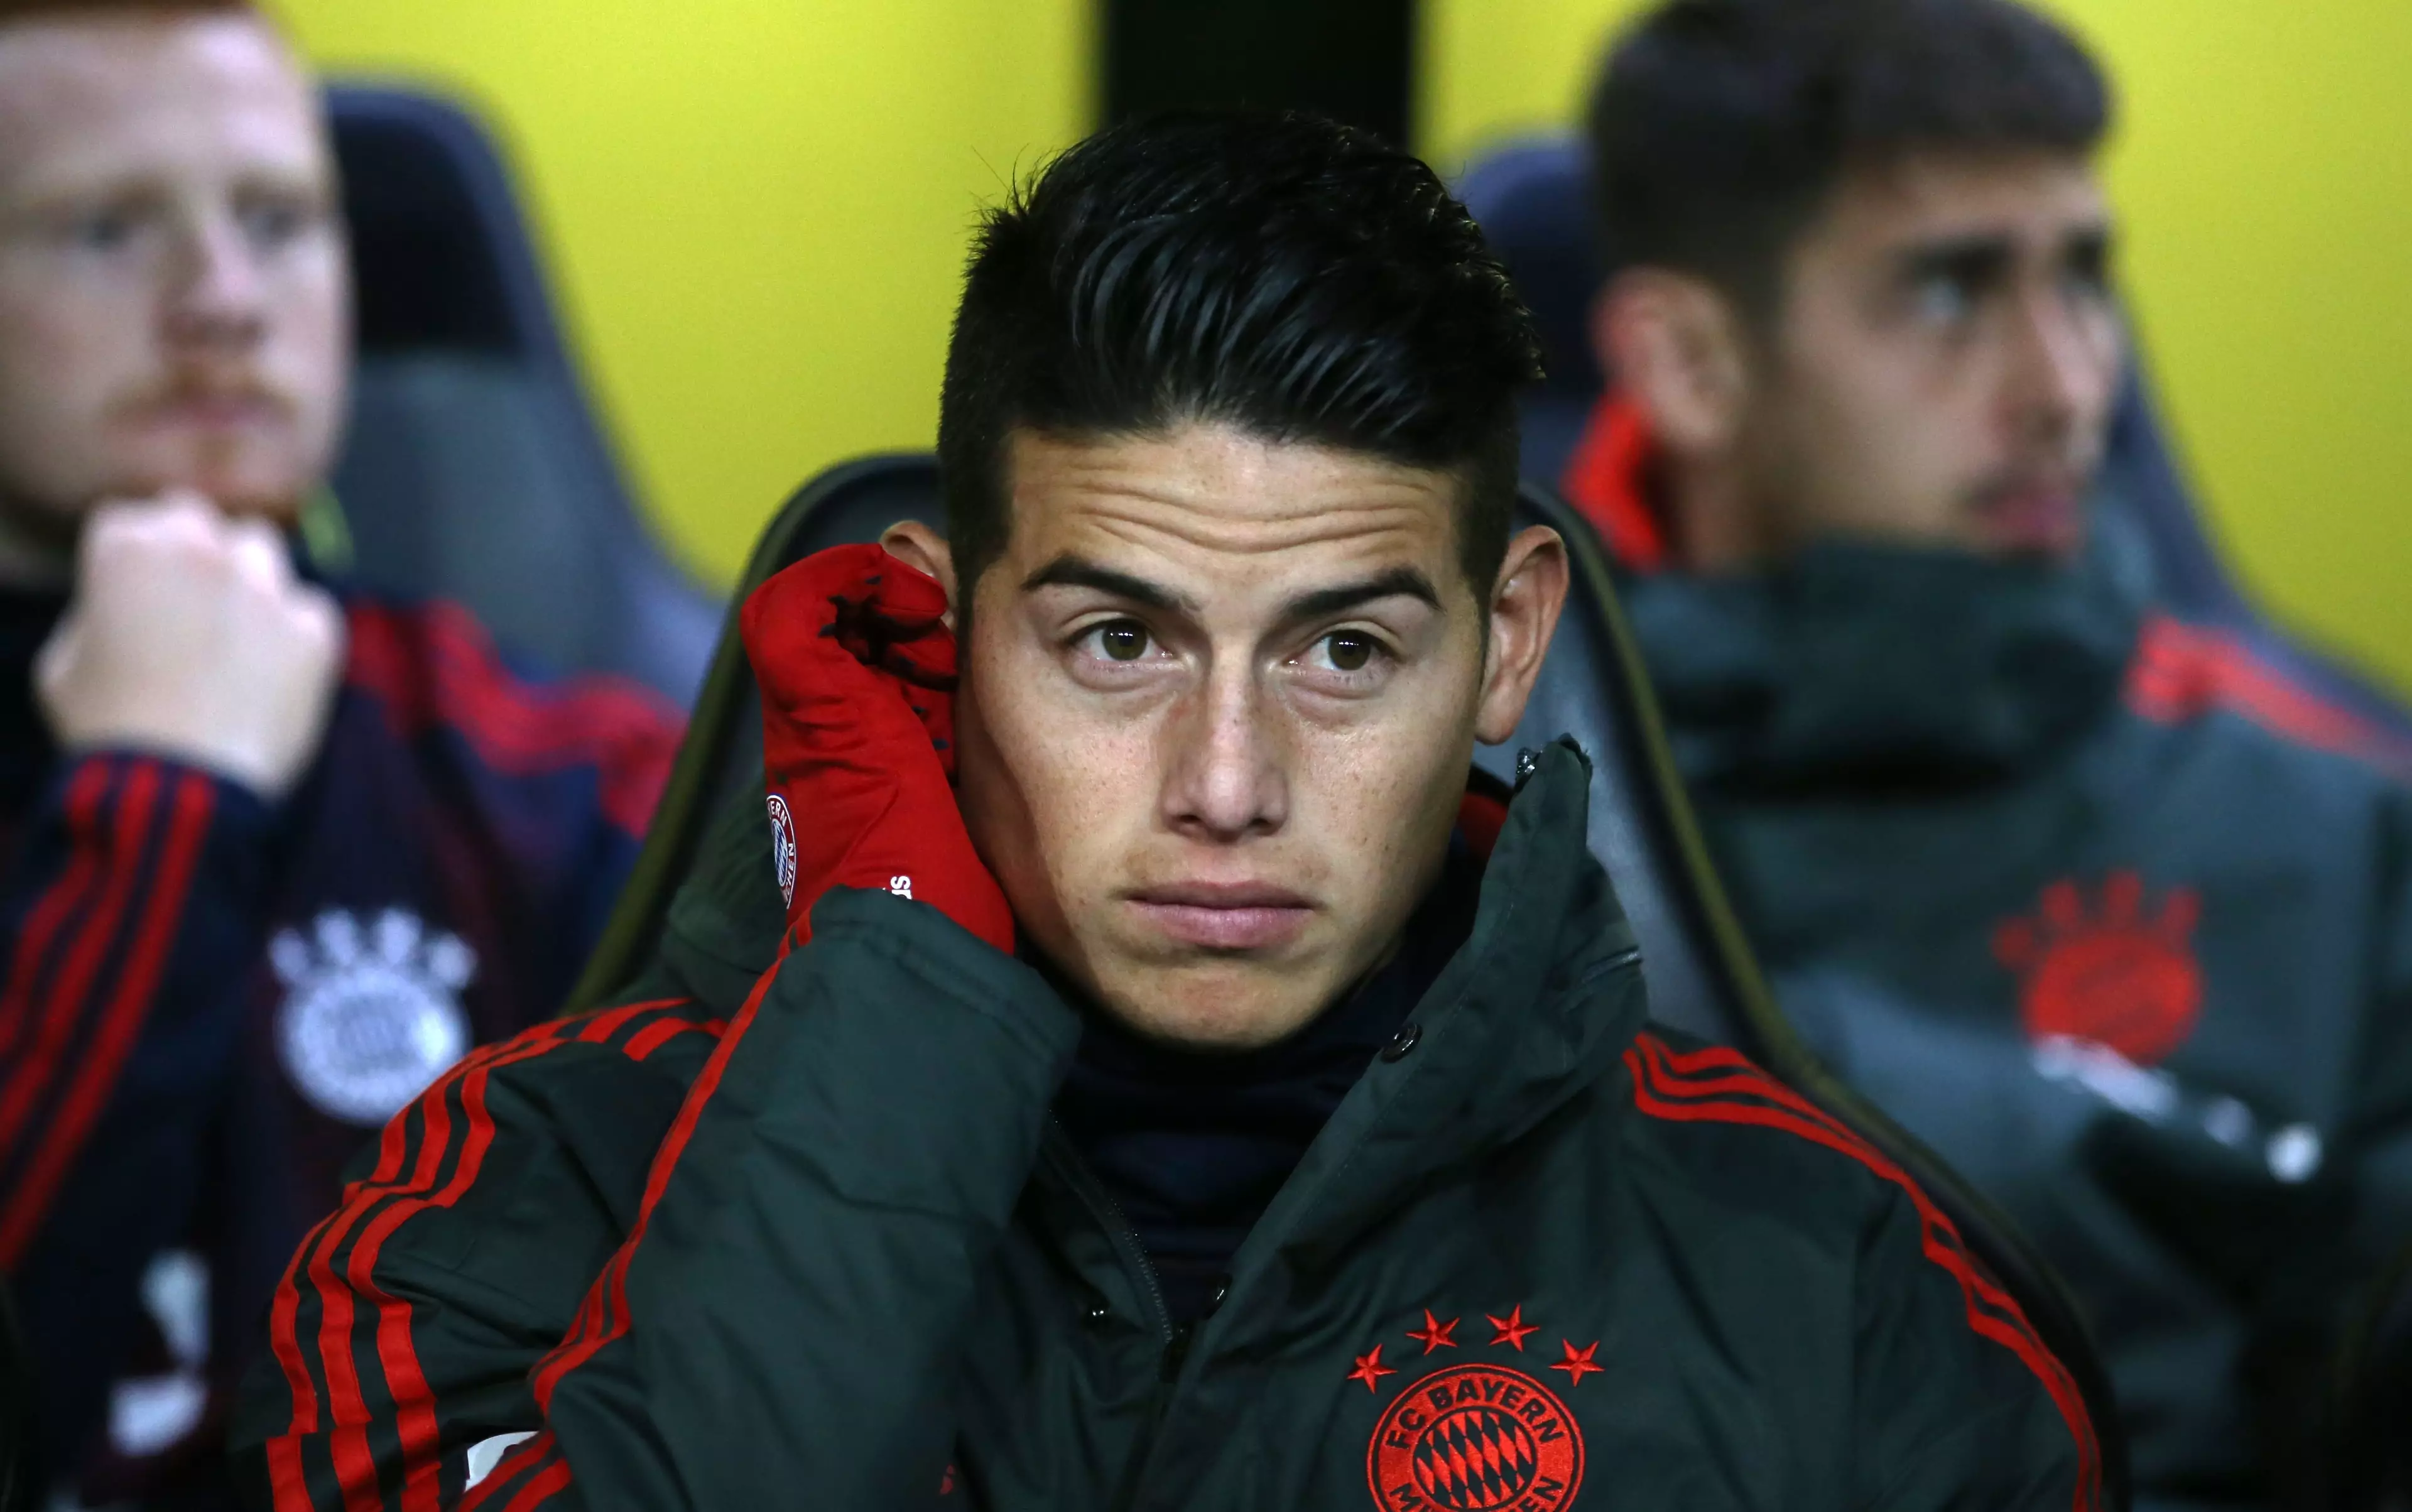 Rodriguez has spent more time on the bench this season than previously. Image: PA Images